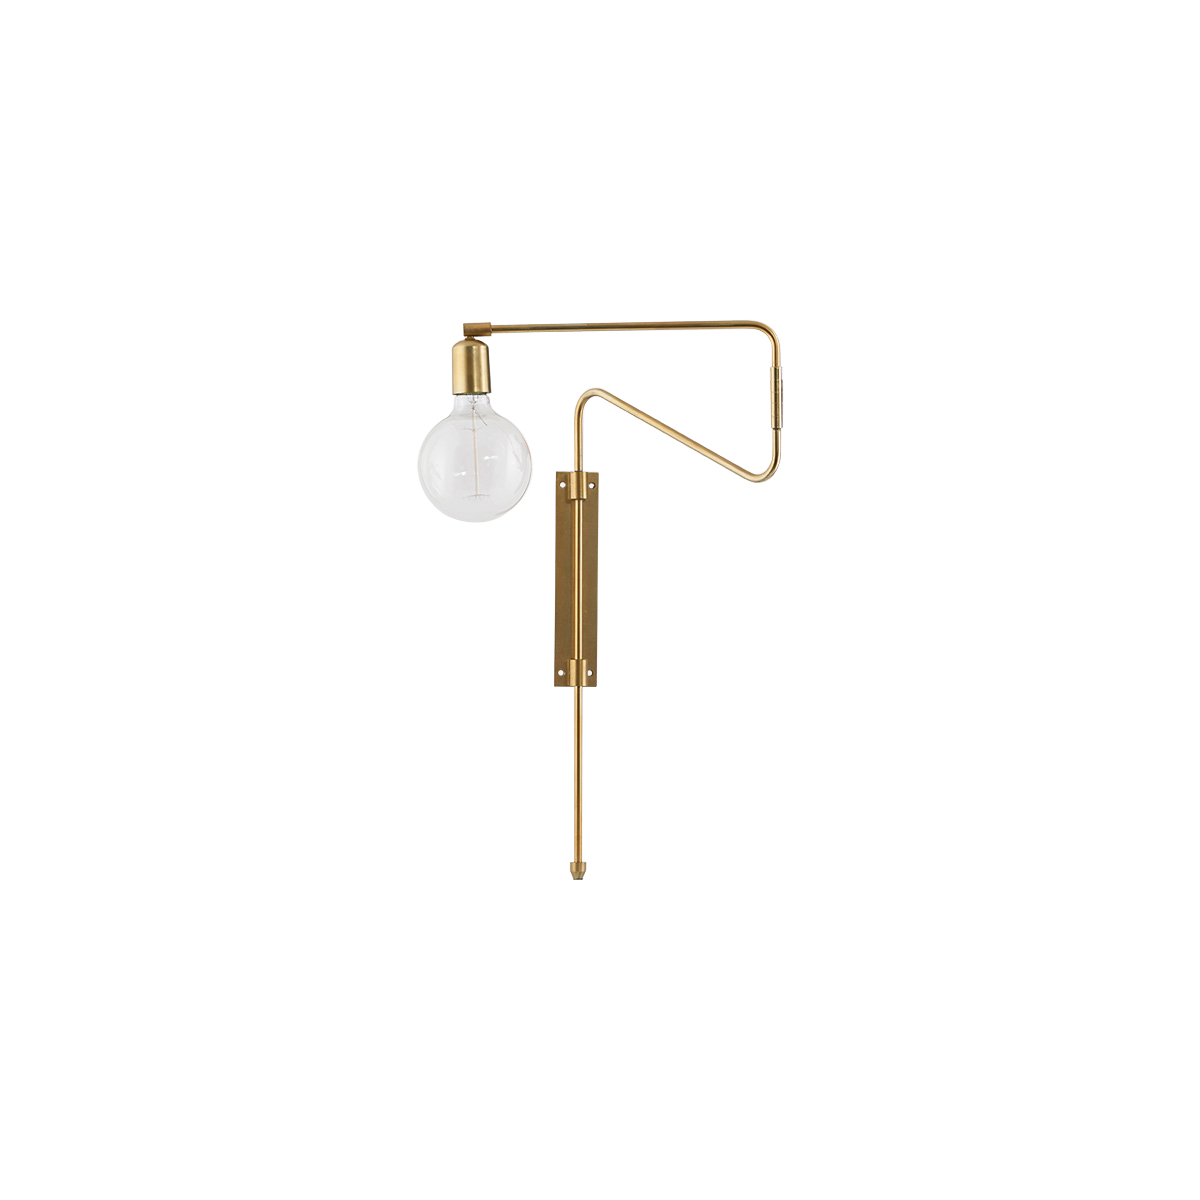 House Doctor - Swing Wall Lamp  Small - Brass (cb0212/203660212)